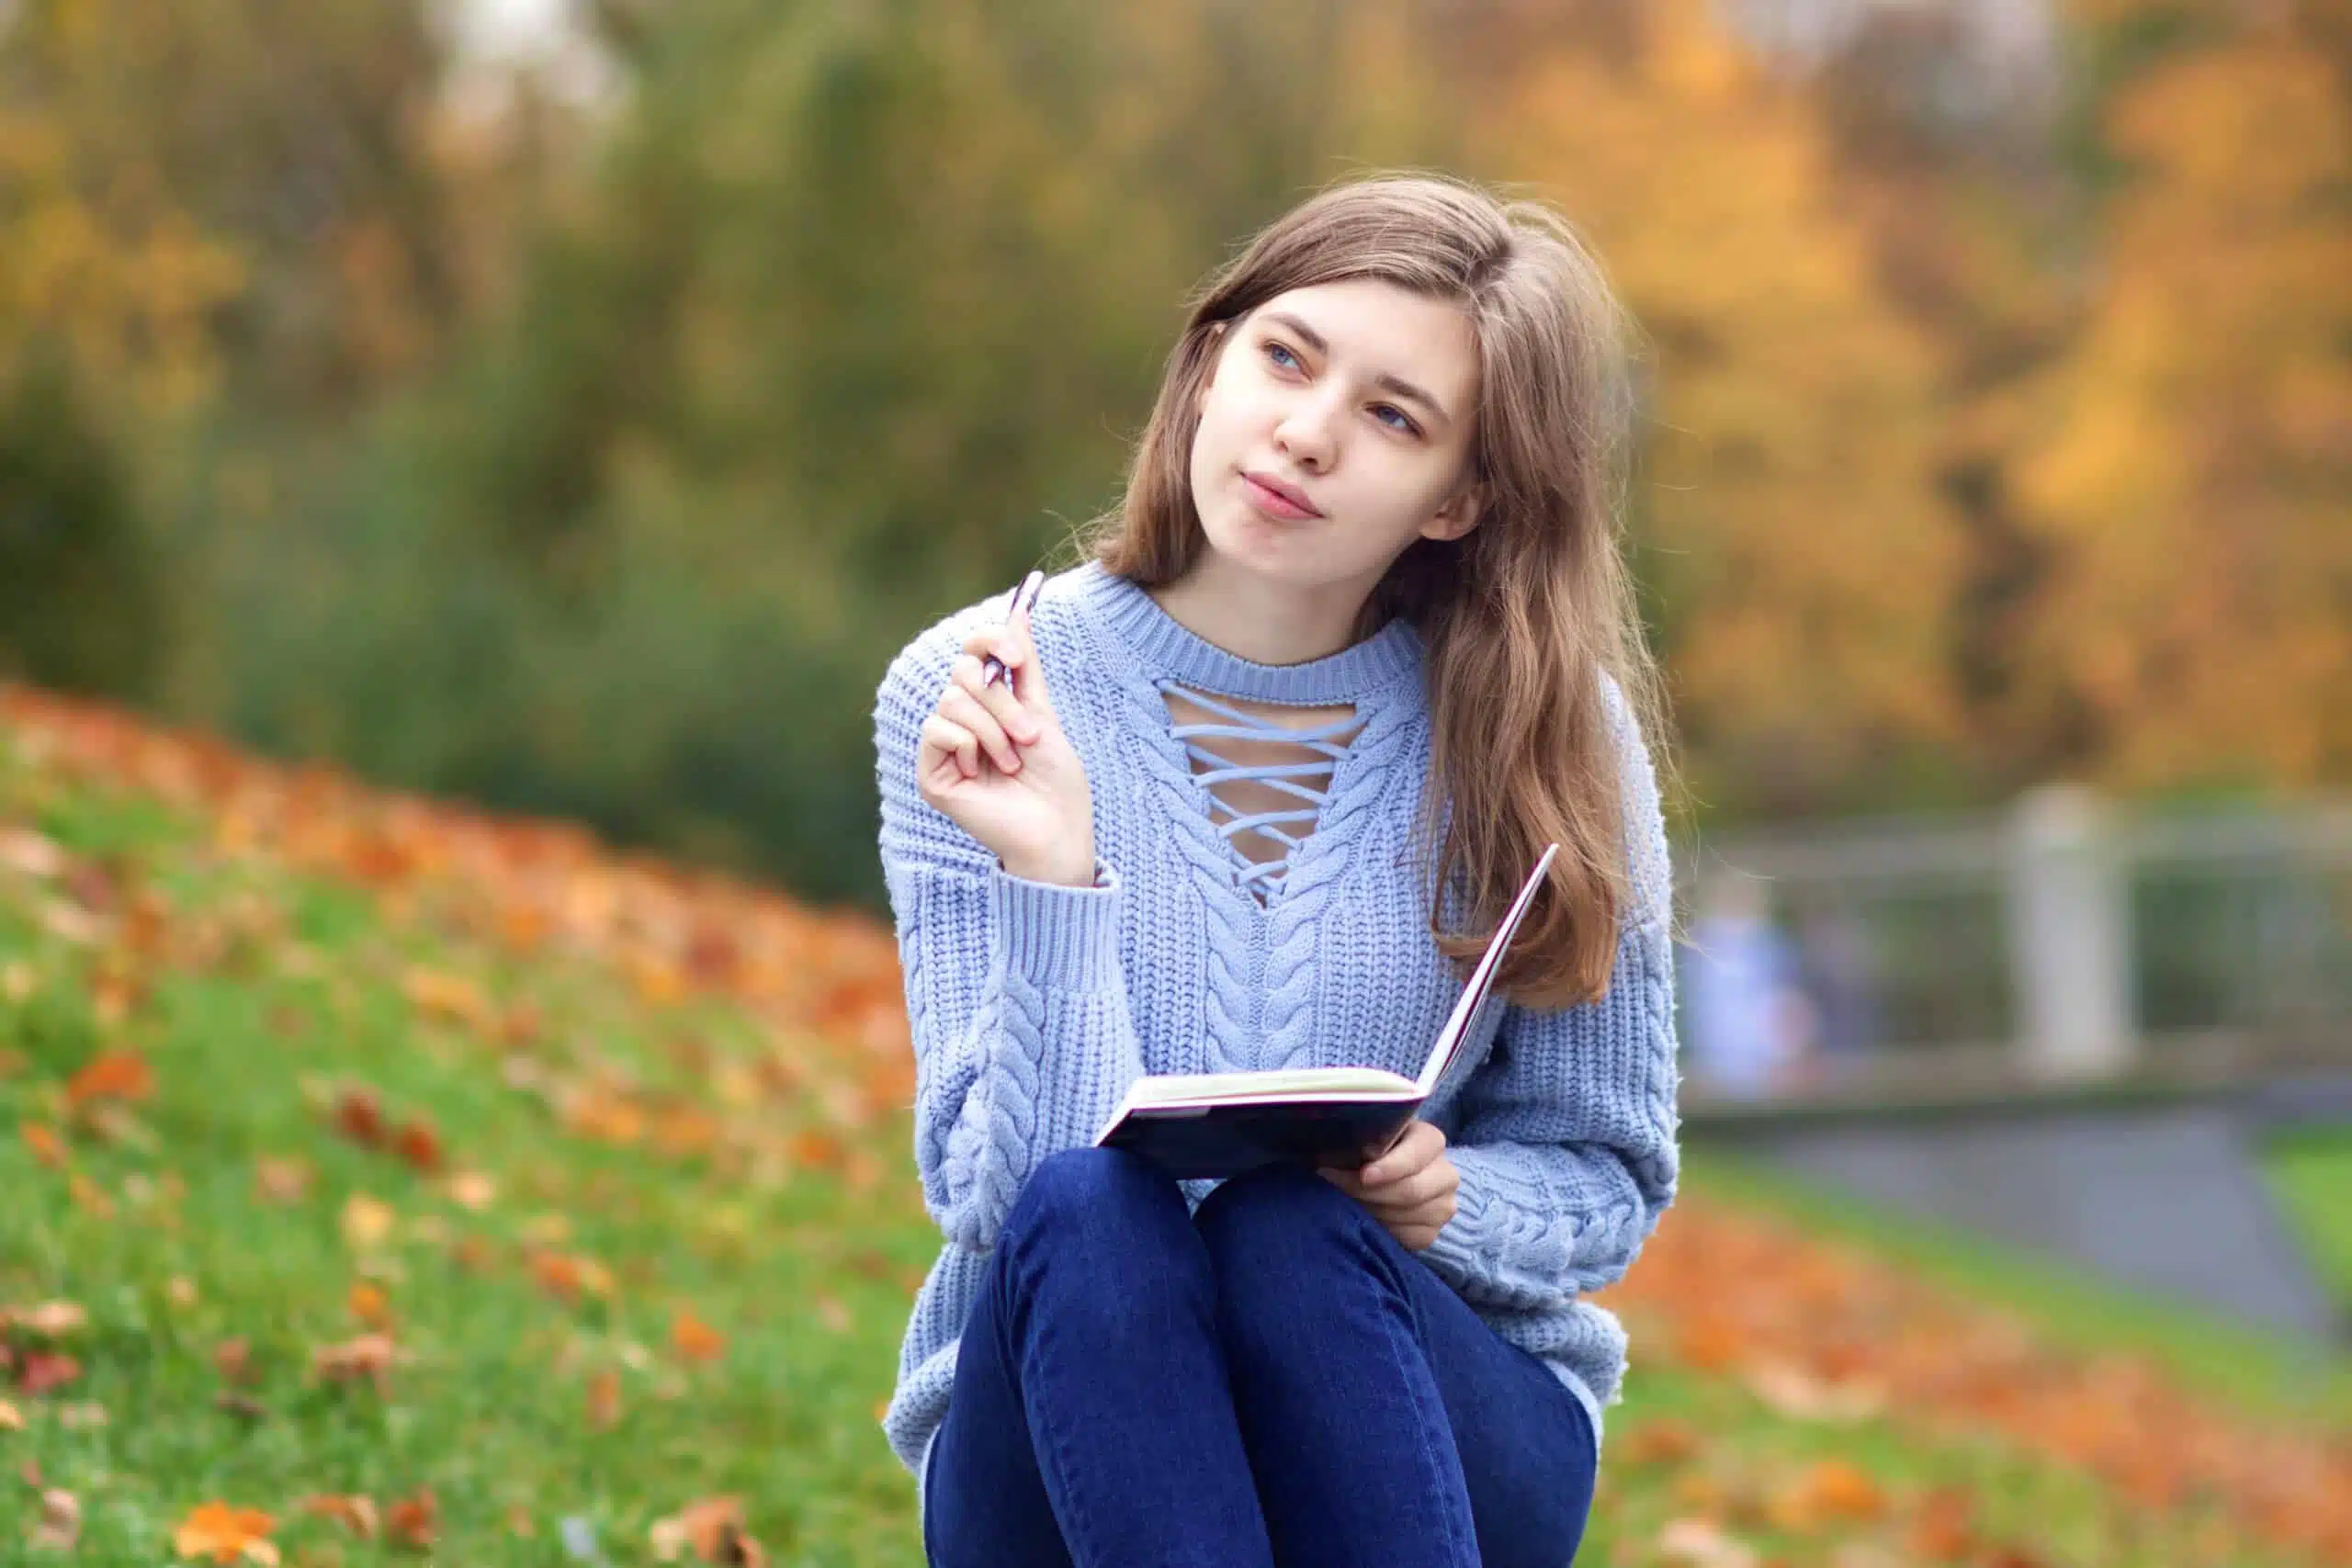 Young beautiful woman writing outdoors in park in pensive mood.